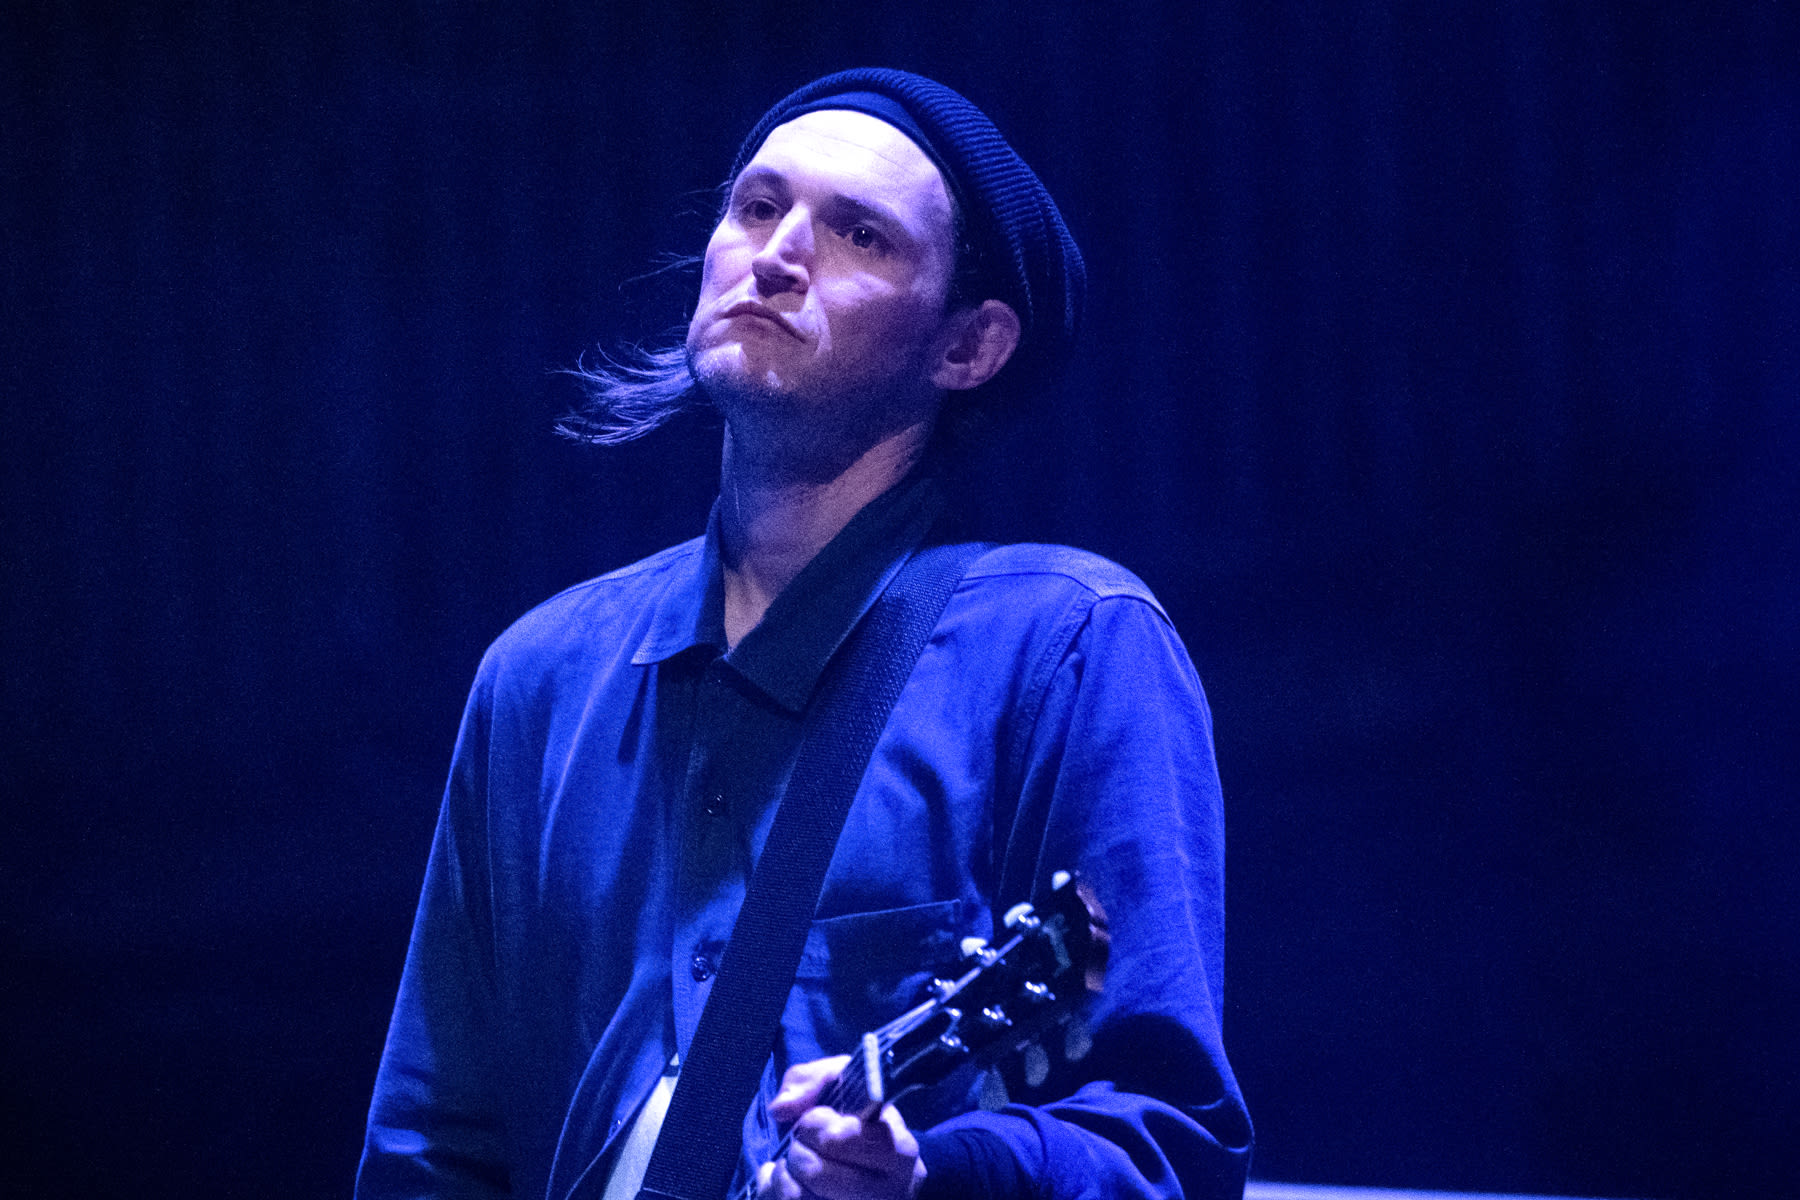 Former Red Hot Chili Peppers Guitarist Josh Klinghoffer Sued for Wrongful Death Over Fatal Traffic Accident